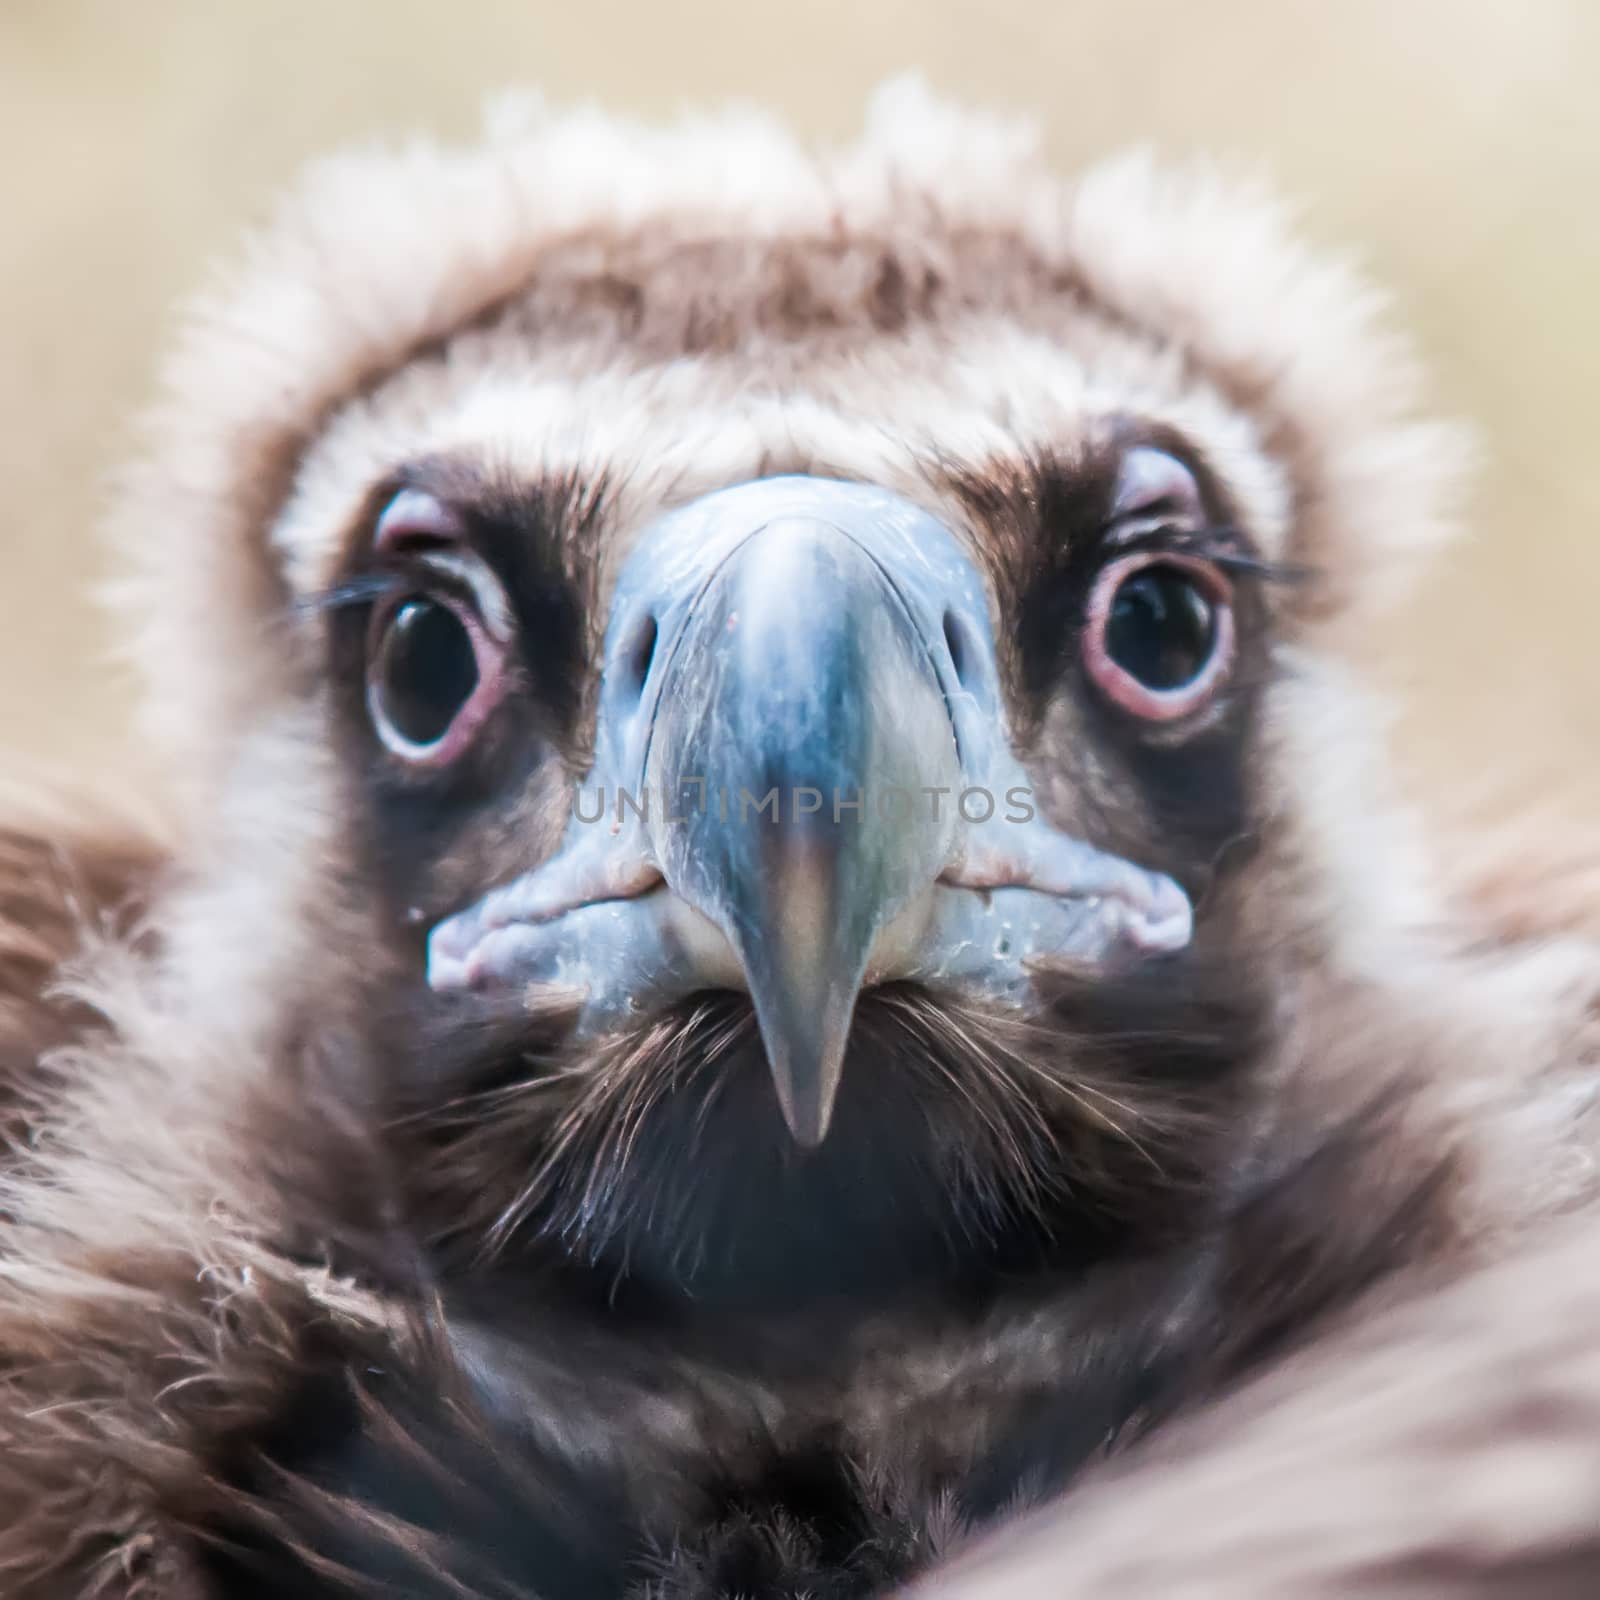 young baby vulture raptor bird by digidreamgrafix